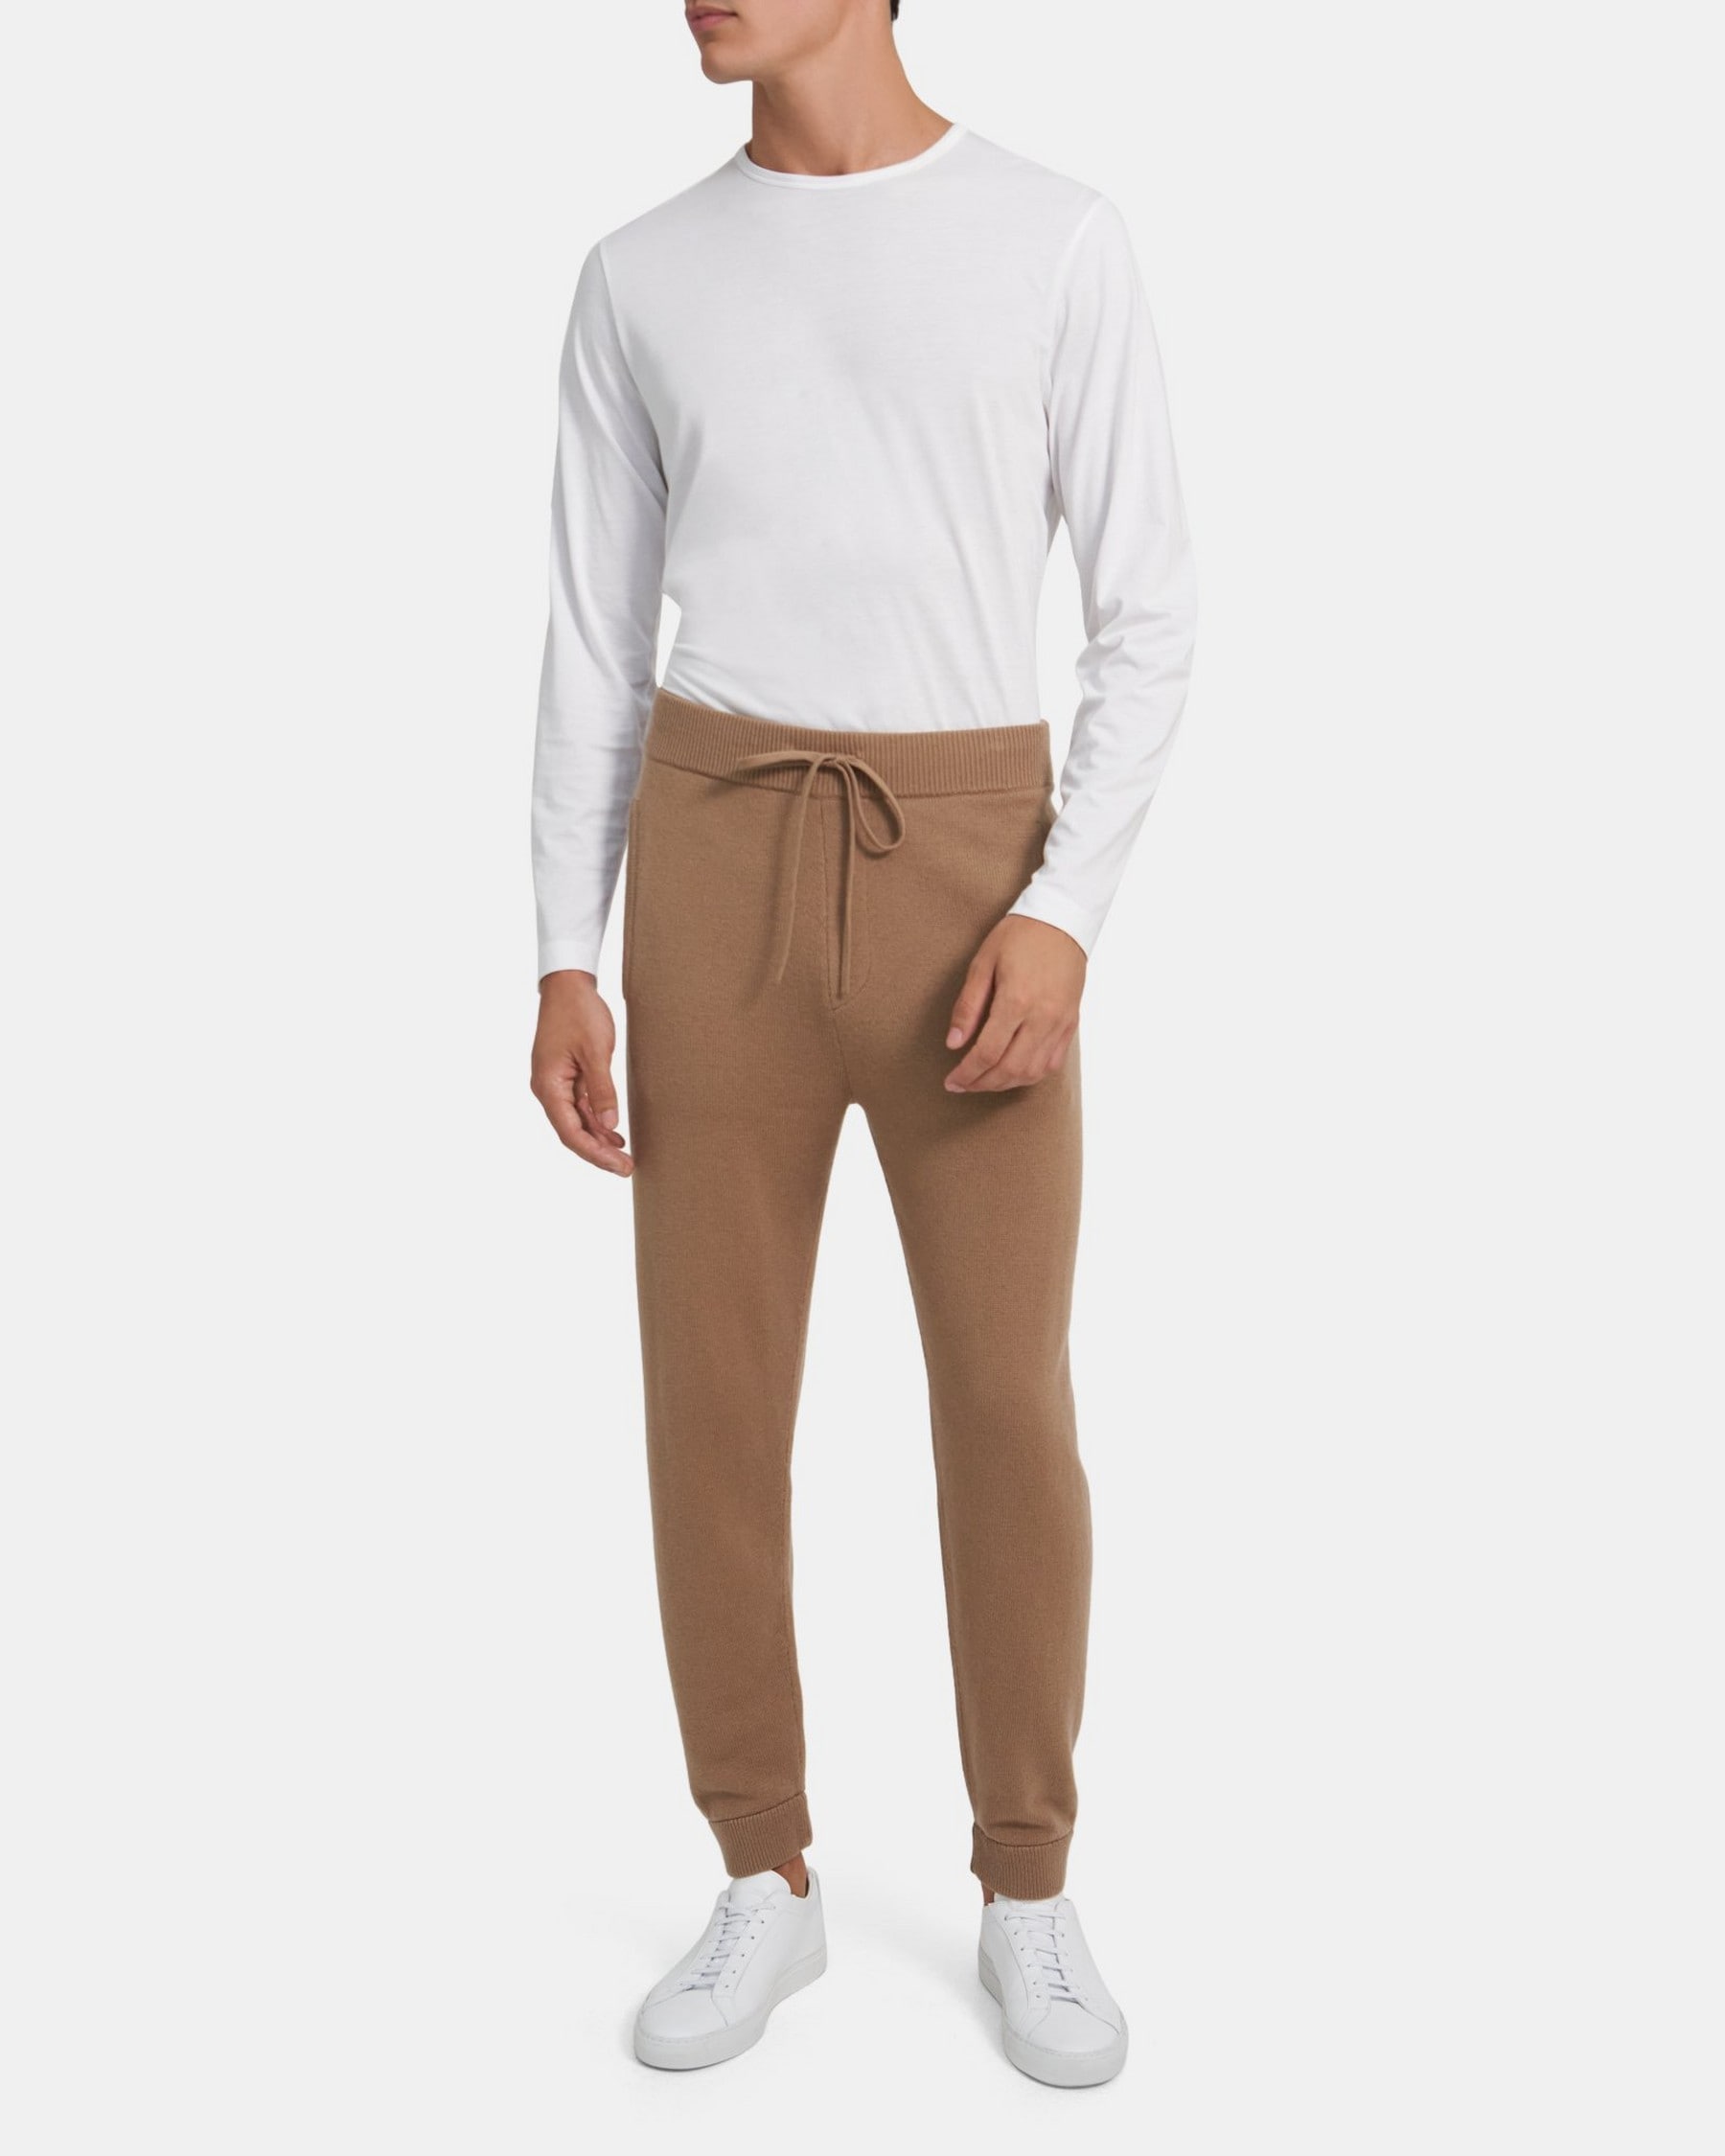 Lounge Pant in Wool-Cashmere